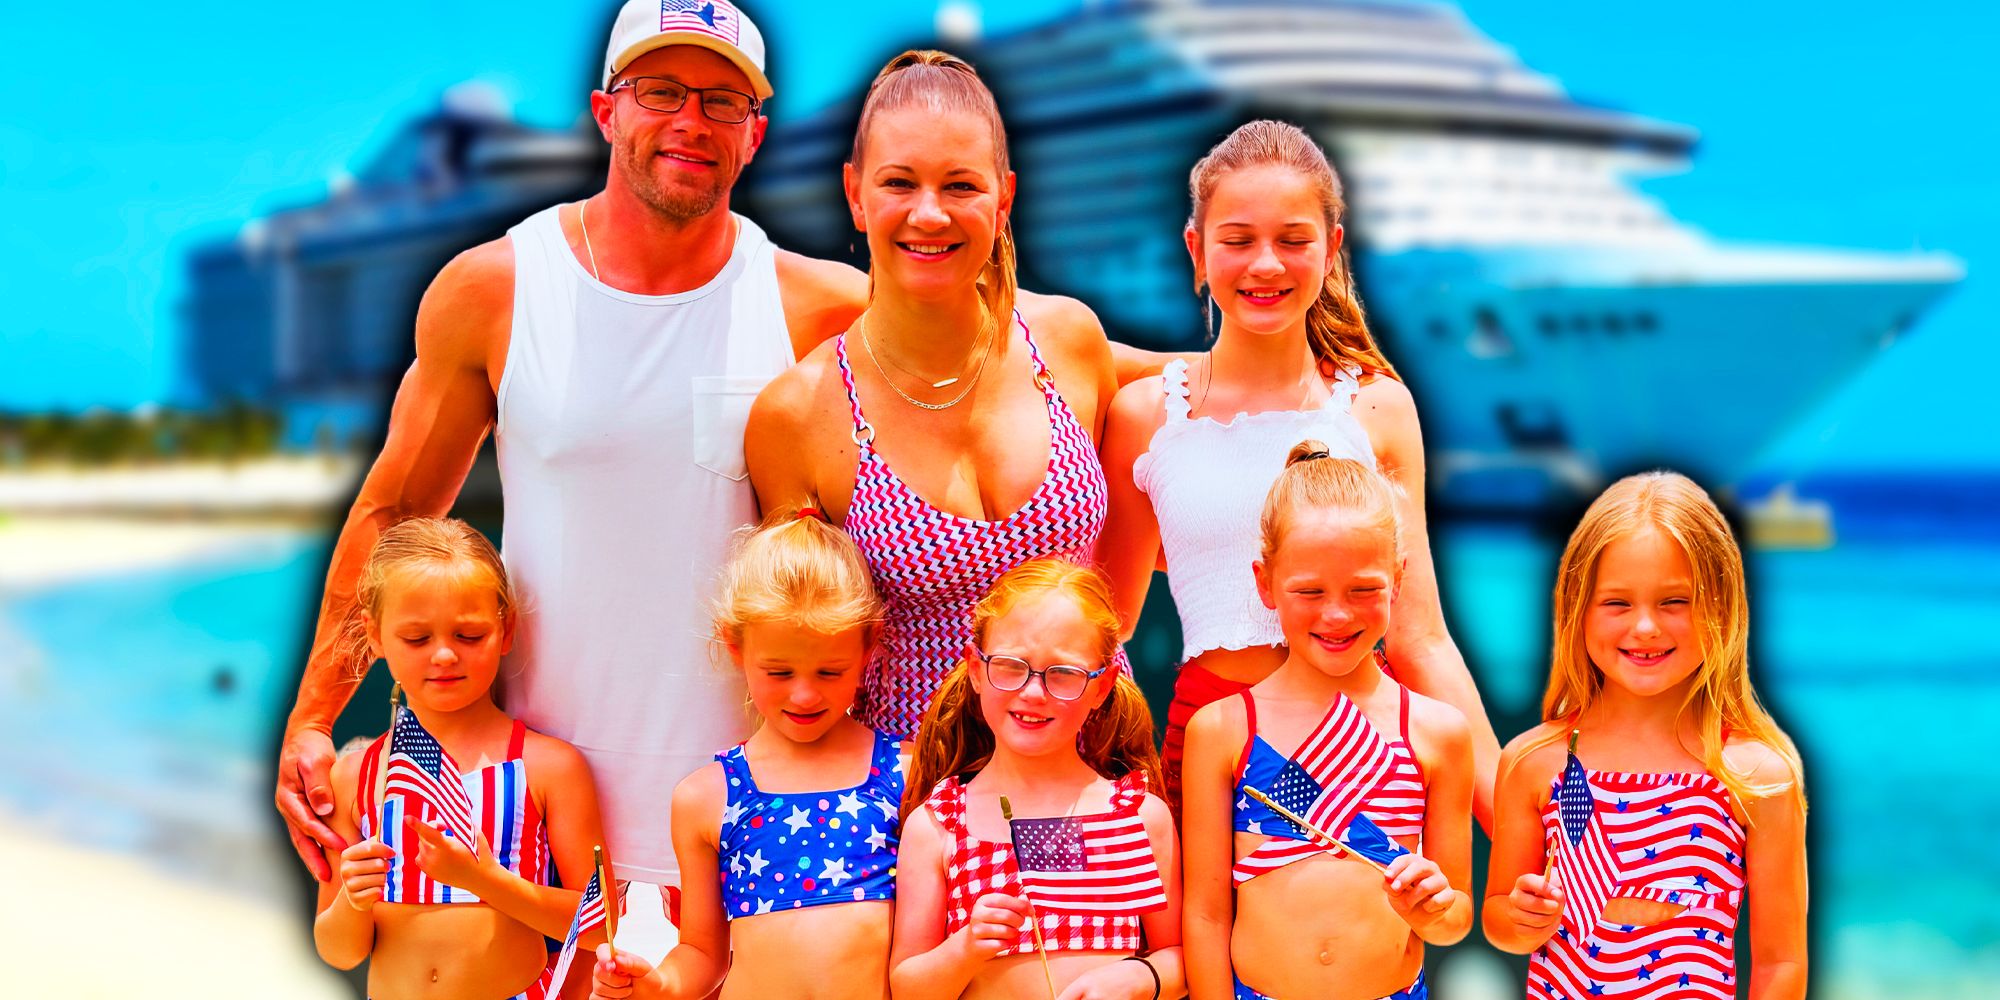 Outdaughtered Busby Family posing for a photo smiling